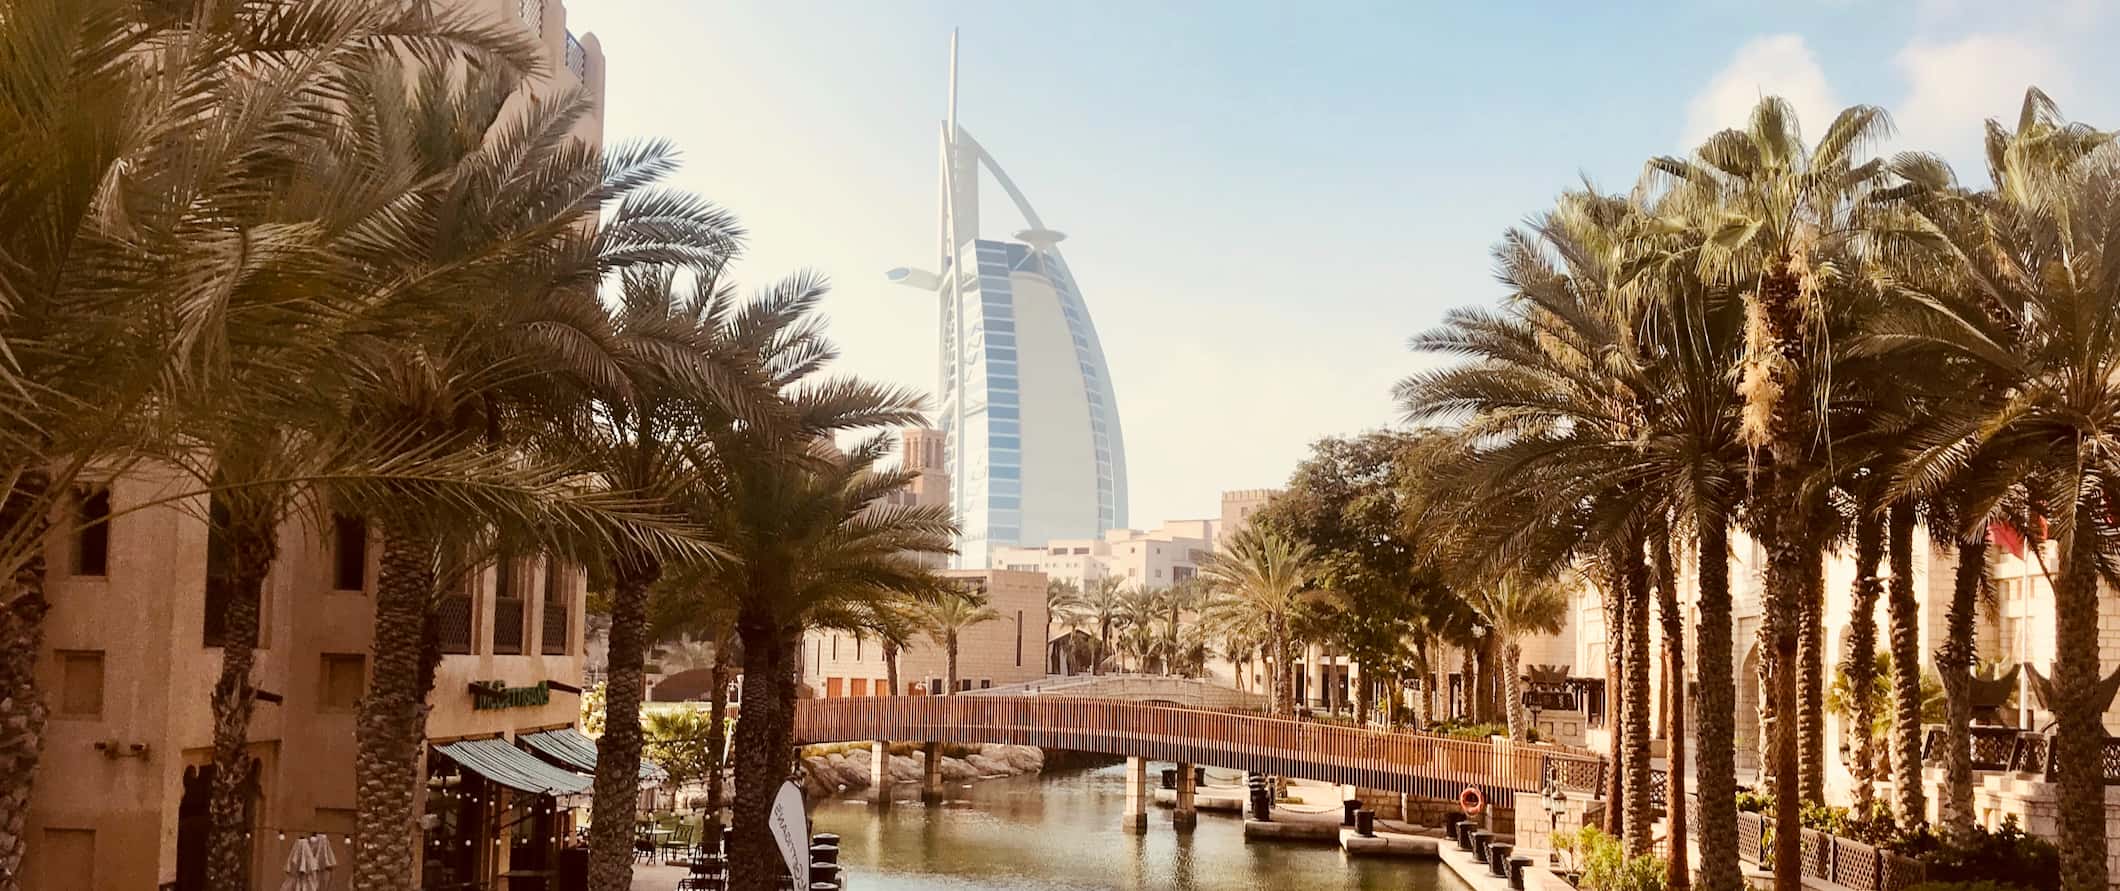 Trees lining a narrow waterway with towering buildings in the background in Dubai